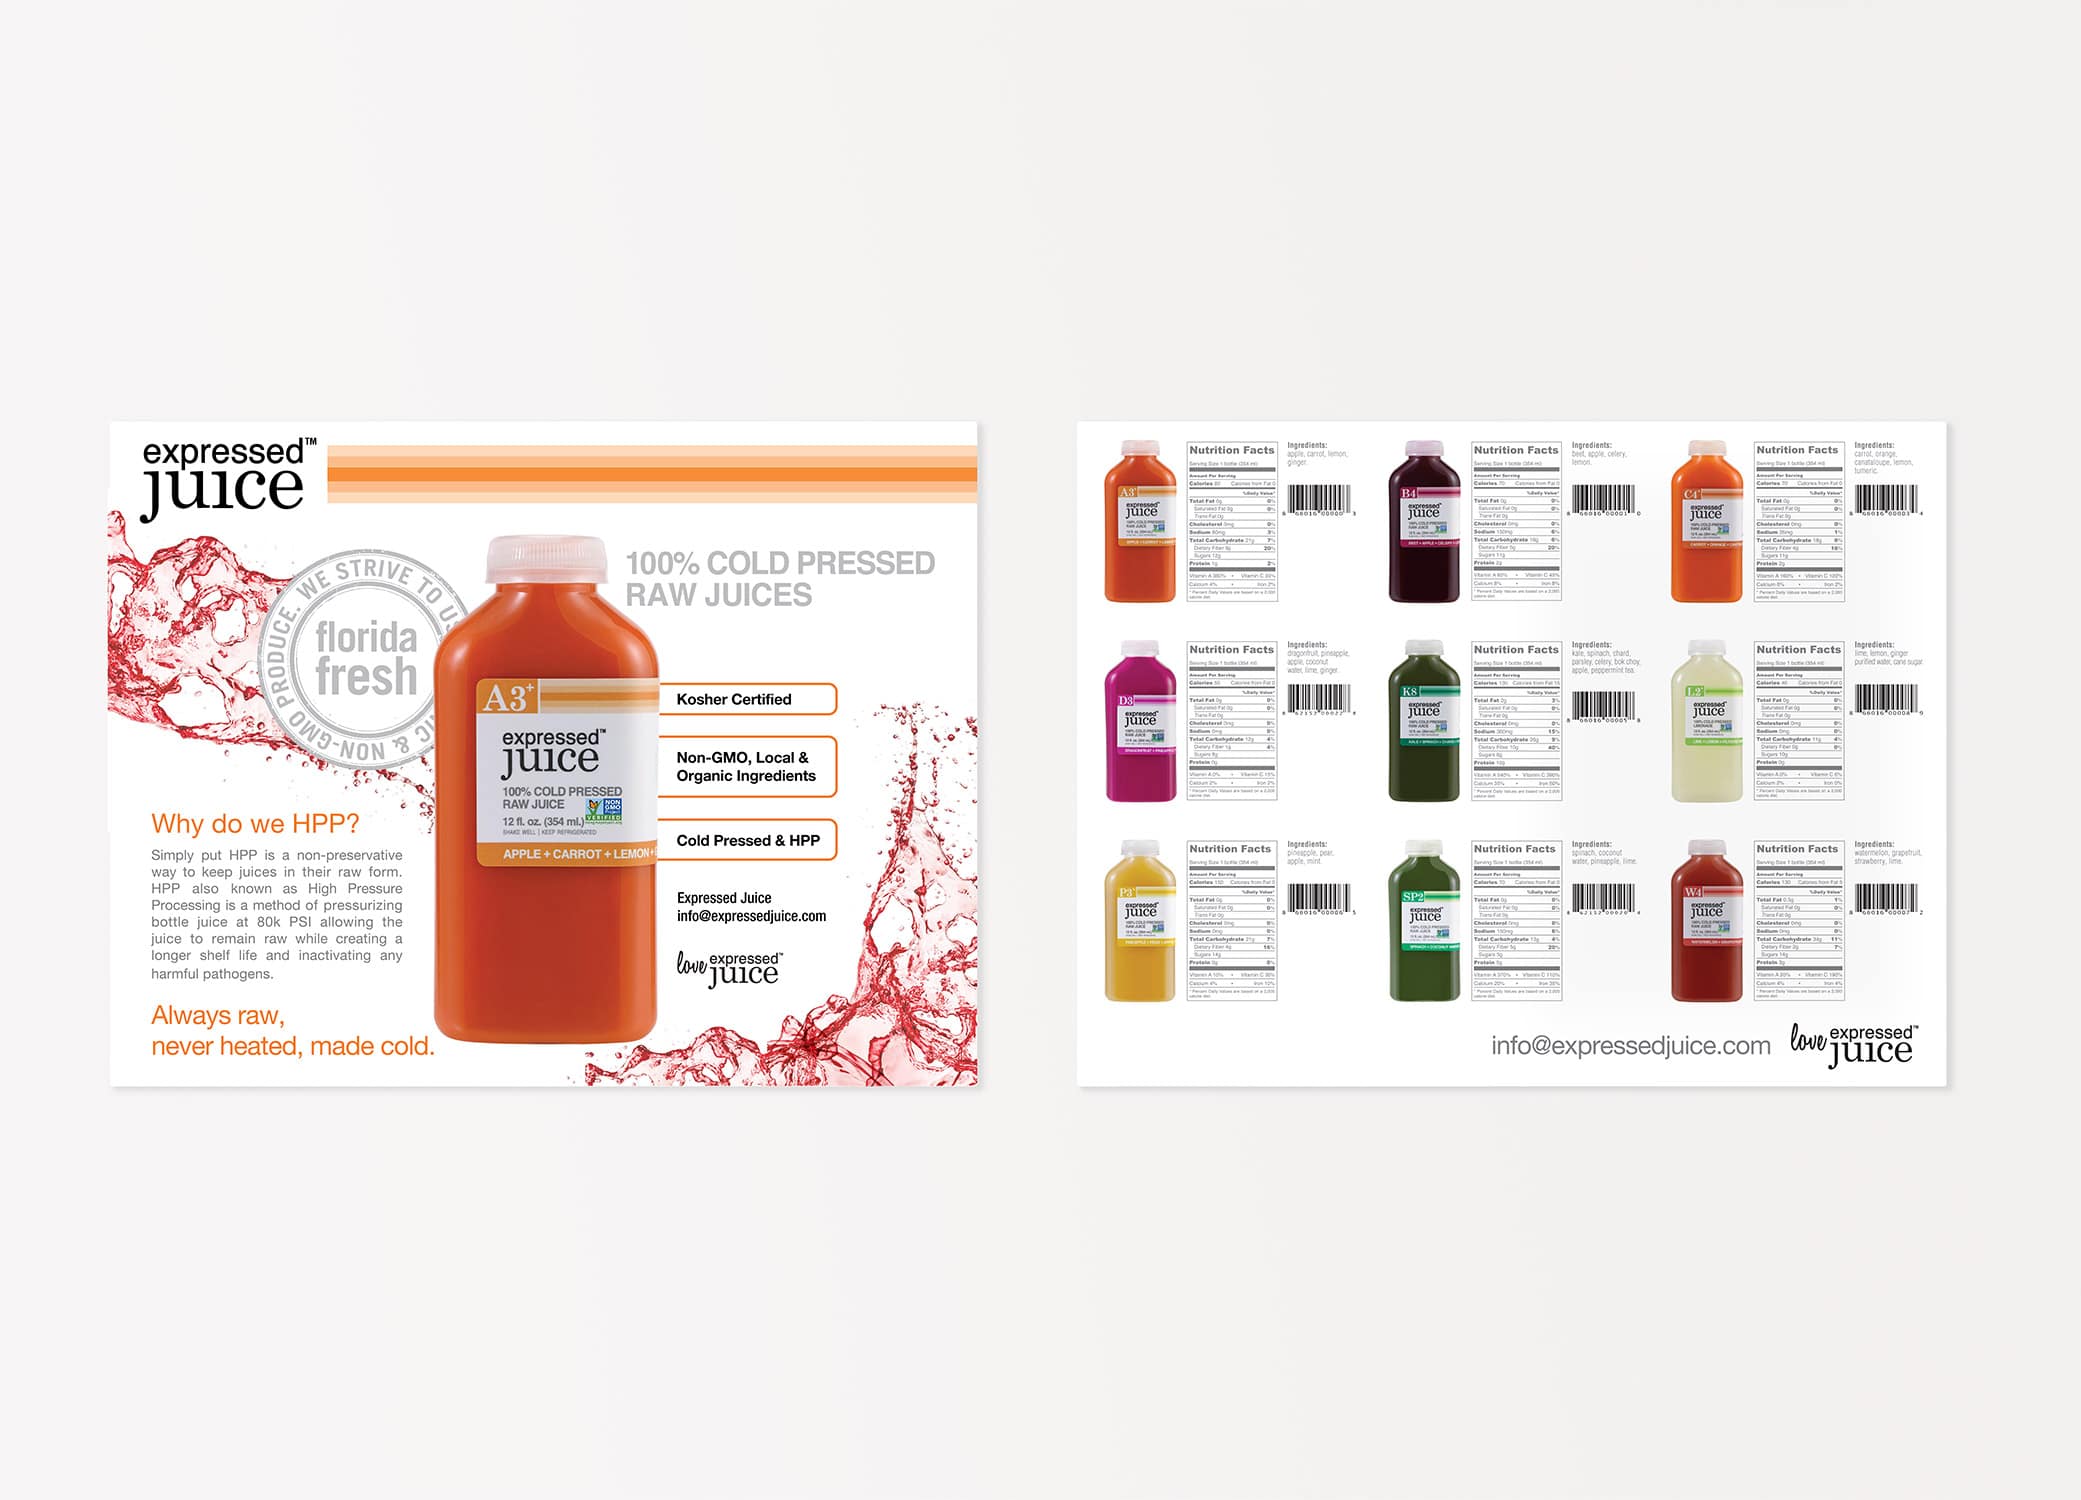 Award winning packaging Expressed Juice sell sheets showcasing with the value of their cold pressed juices, information about different flavors and nutrition benefits.